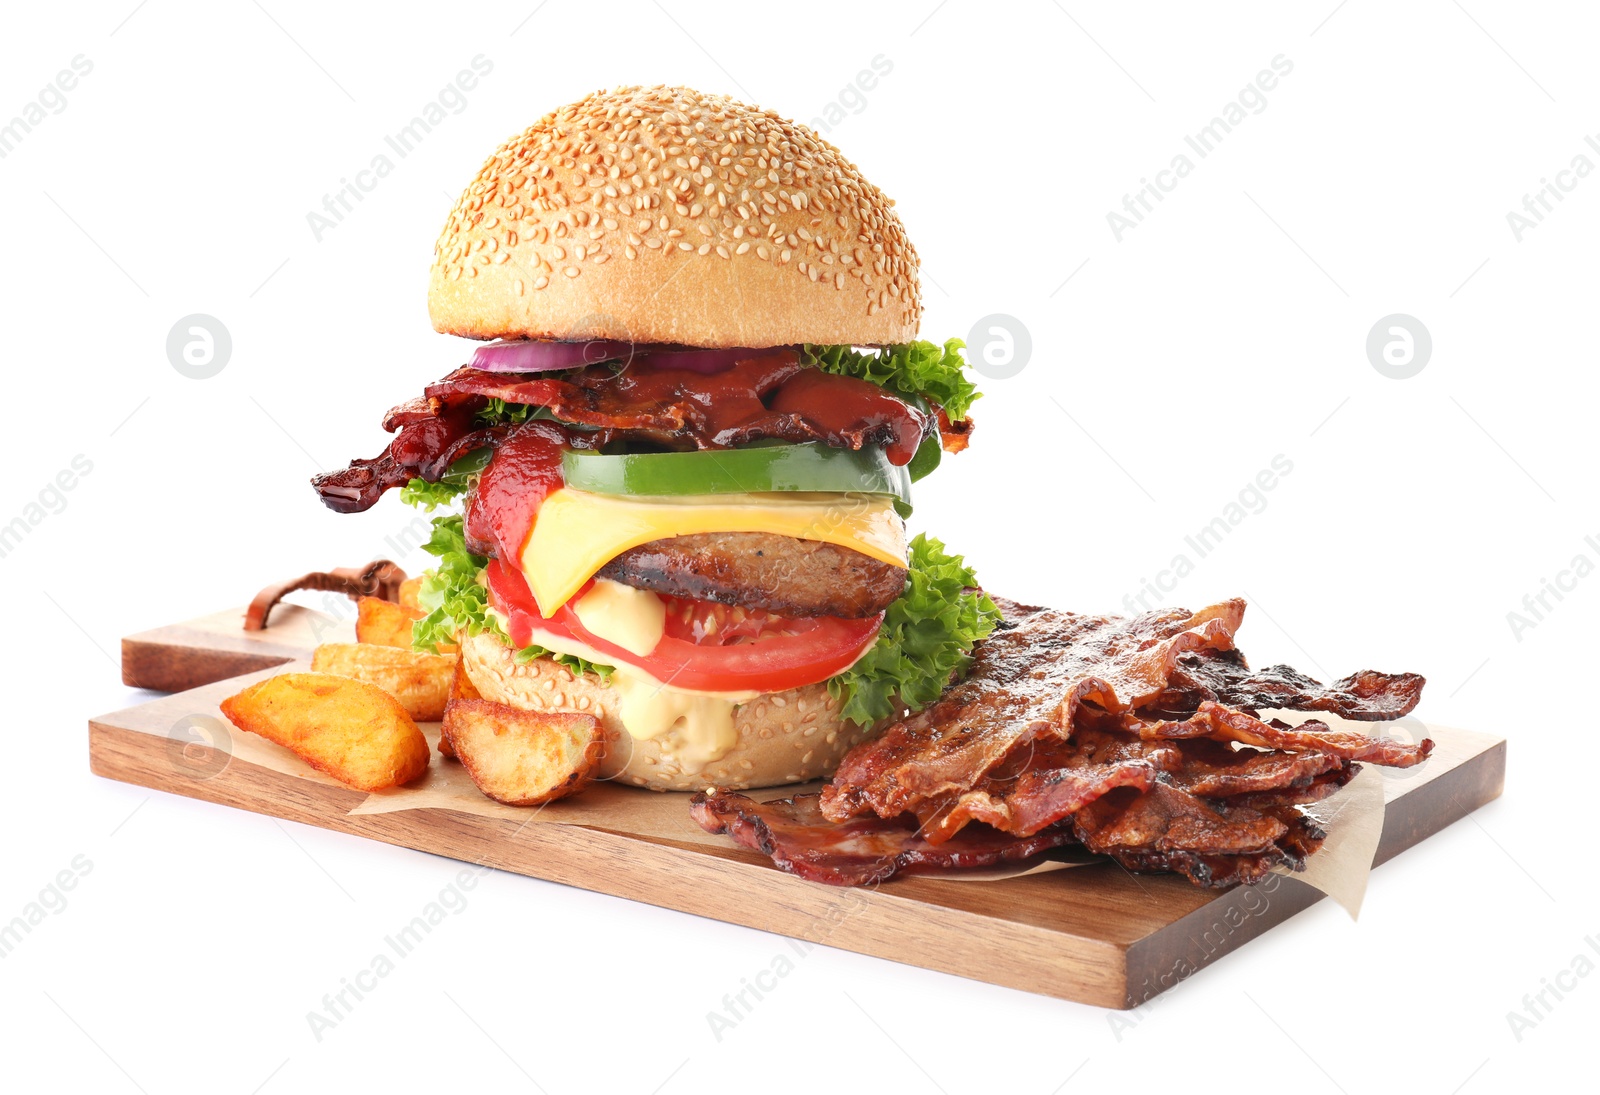 Image of Tasty burger with bacon on white background